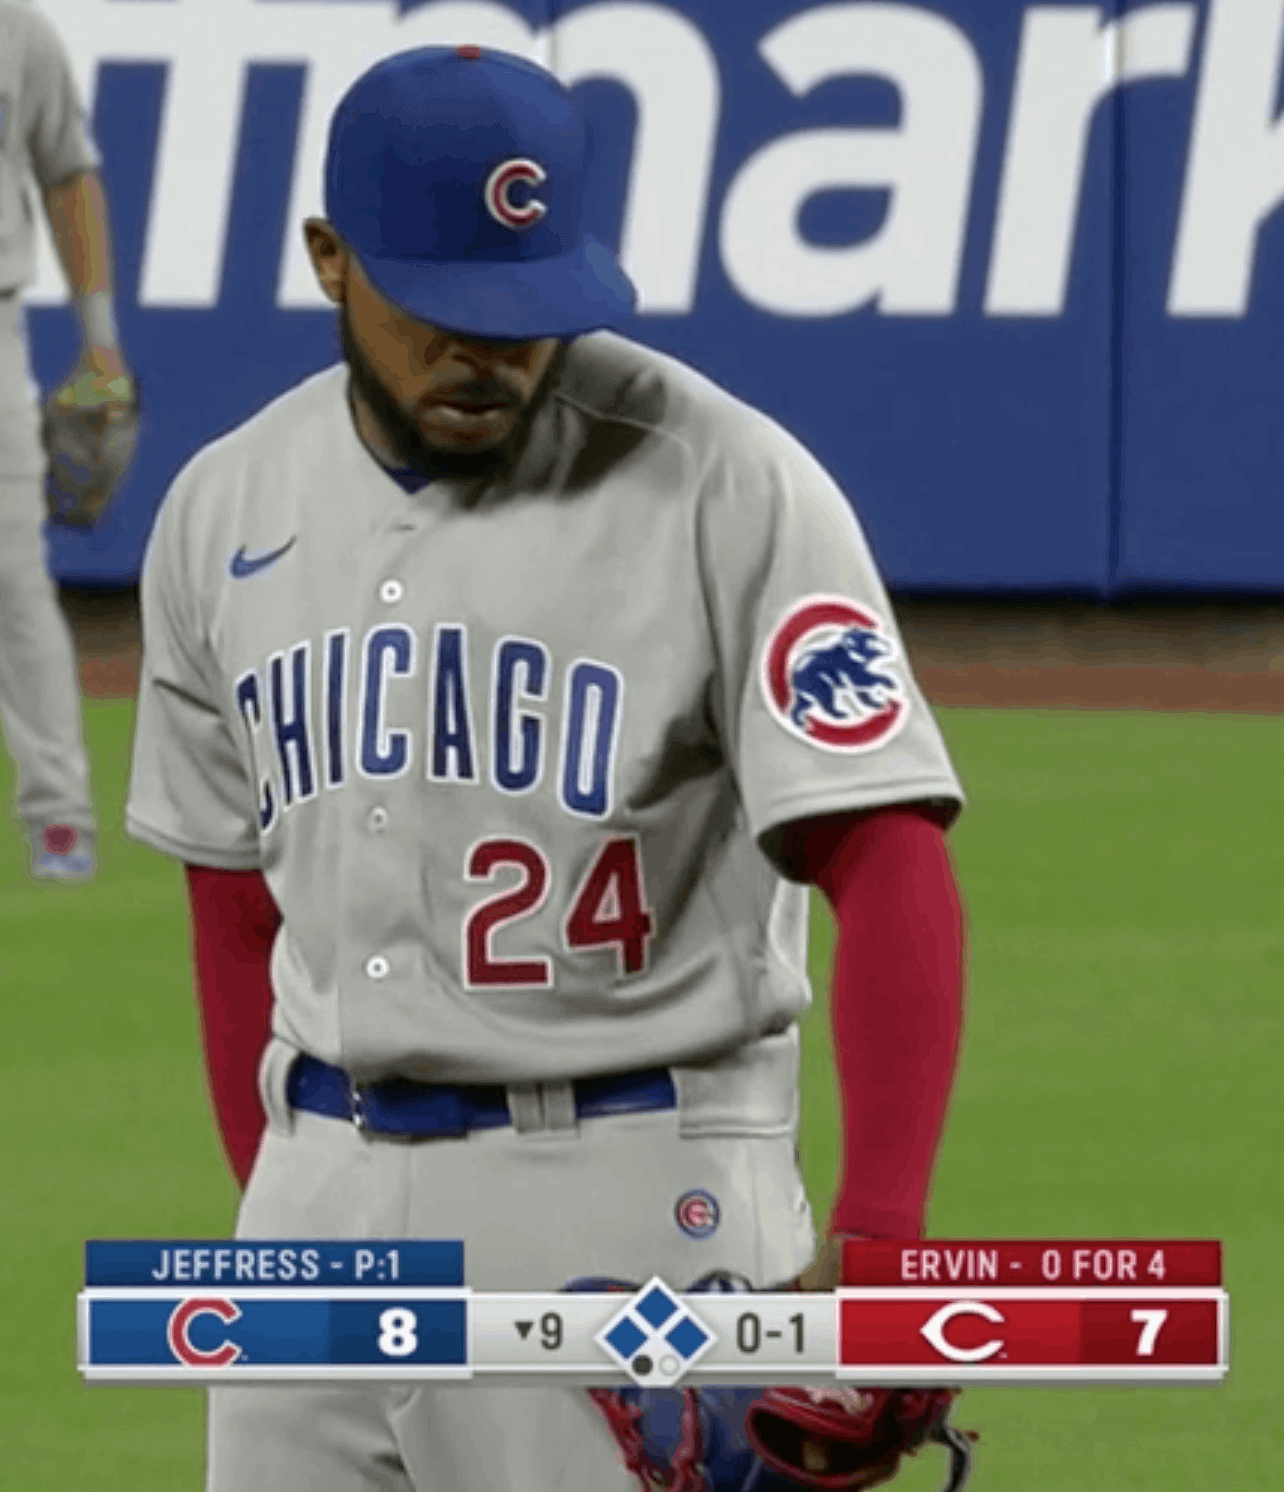 Cubs 5, Reds 4. And Willson Contreras has a tender knee. - Cubby-Blue